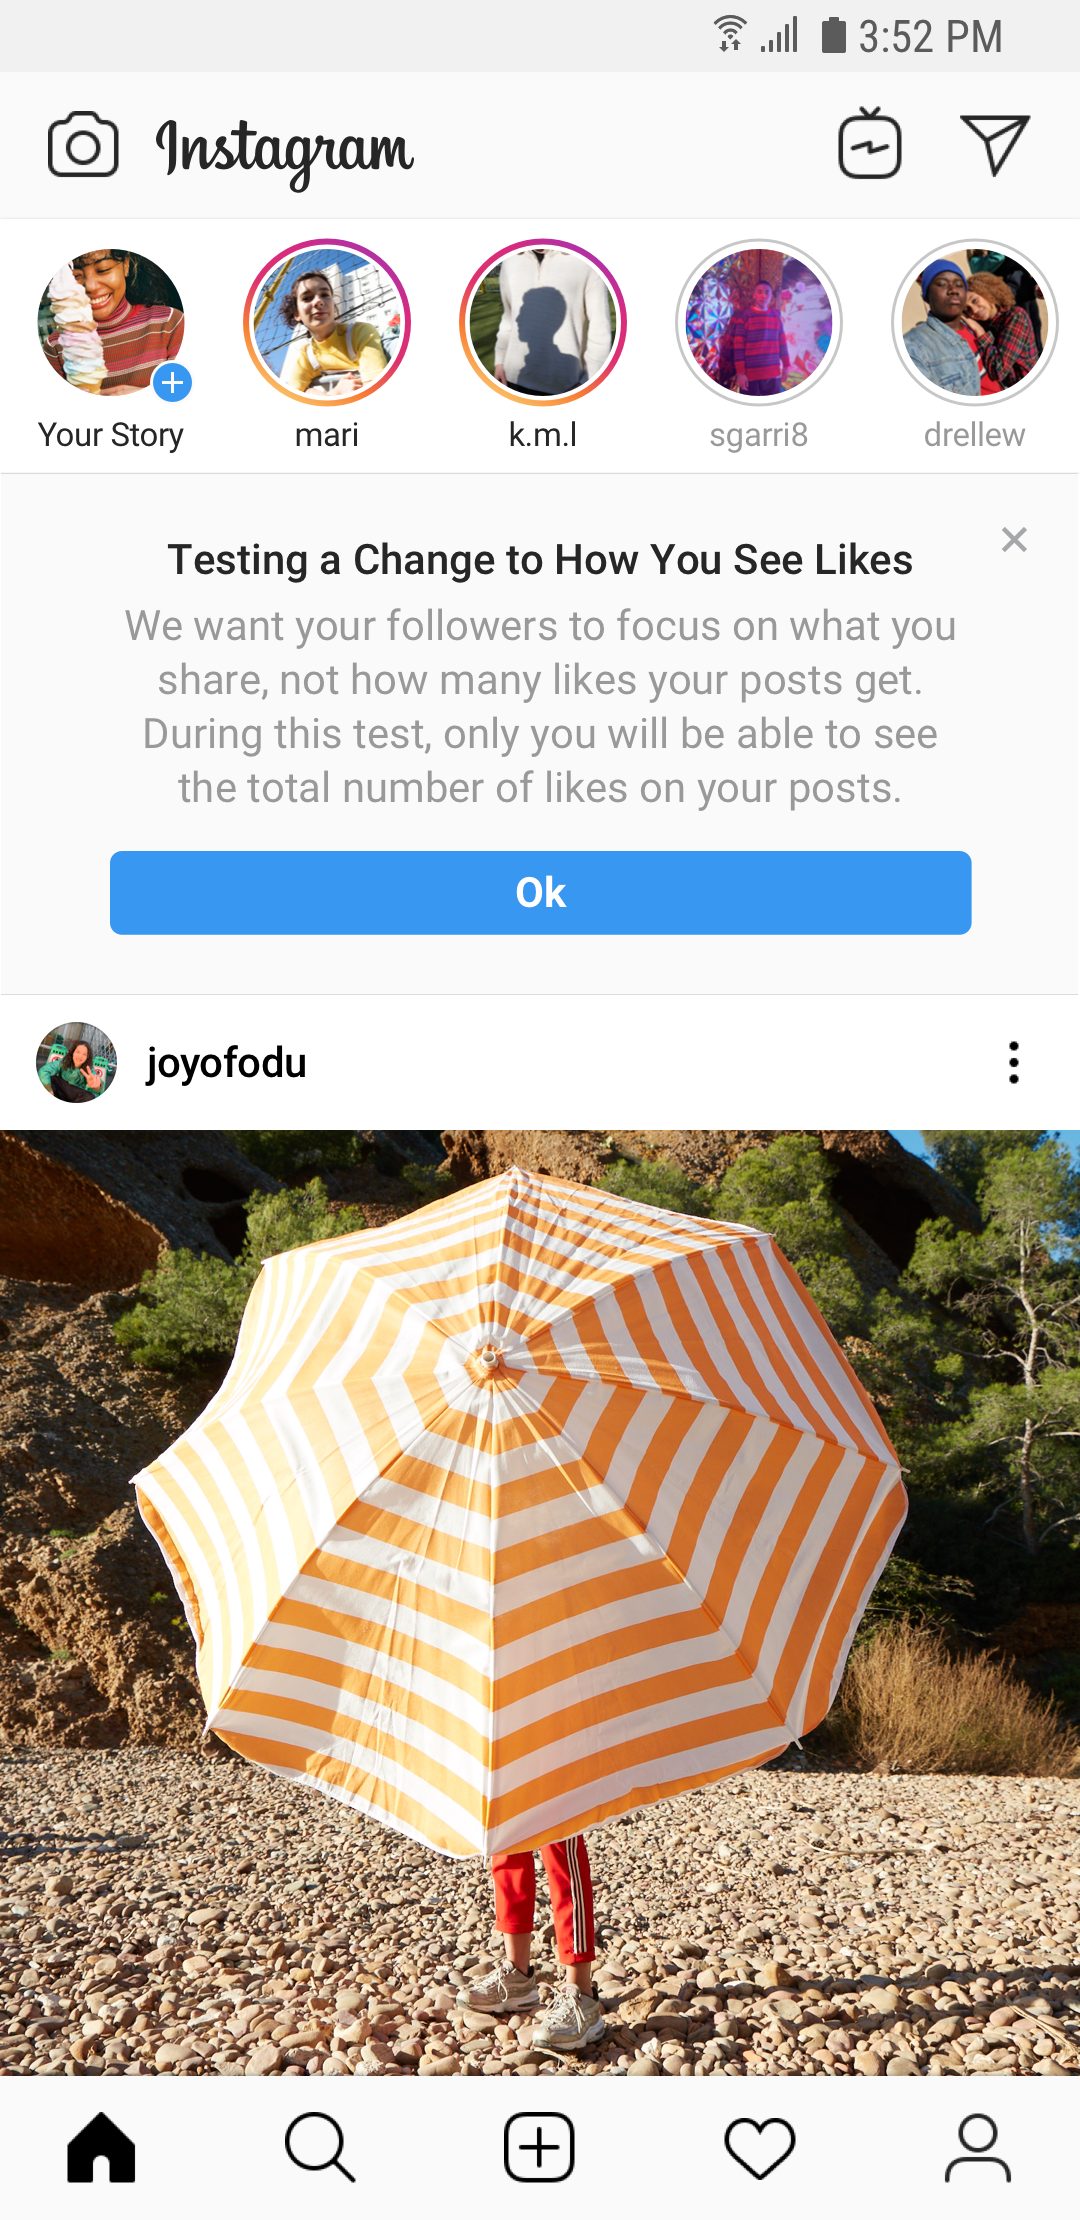 Instagram Is Hiding Like Counts From Followers In A New Test - 1080 x 2220 png 3340kB